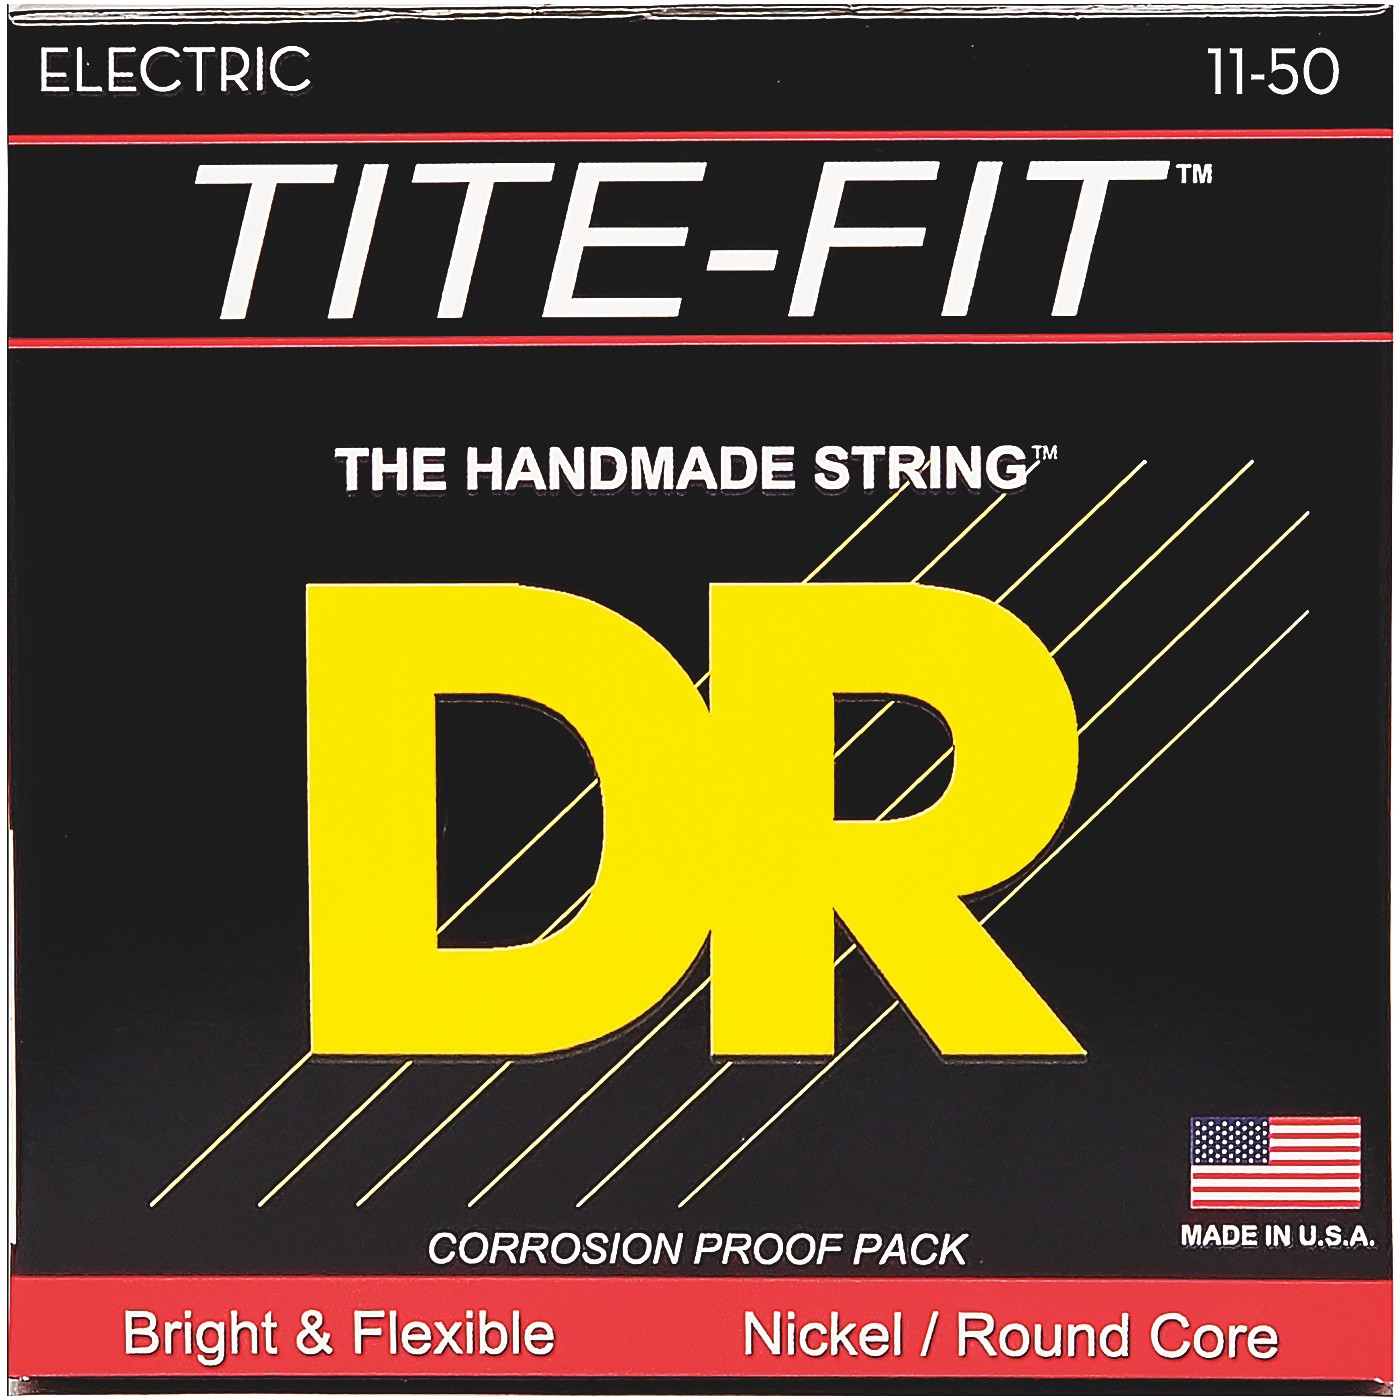 DR Strings Tite-Fit EH-11 Extra Heavy Nickel Plated Electric Guitar Strings thumbnail